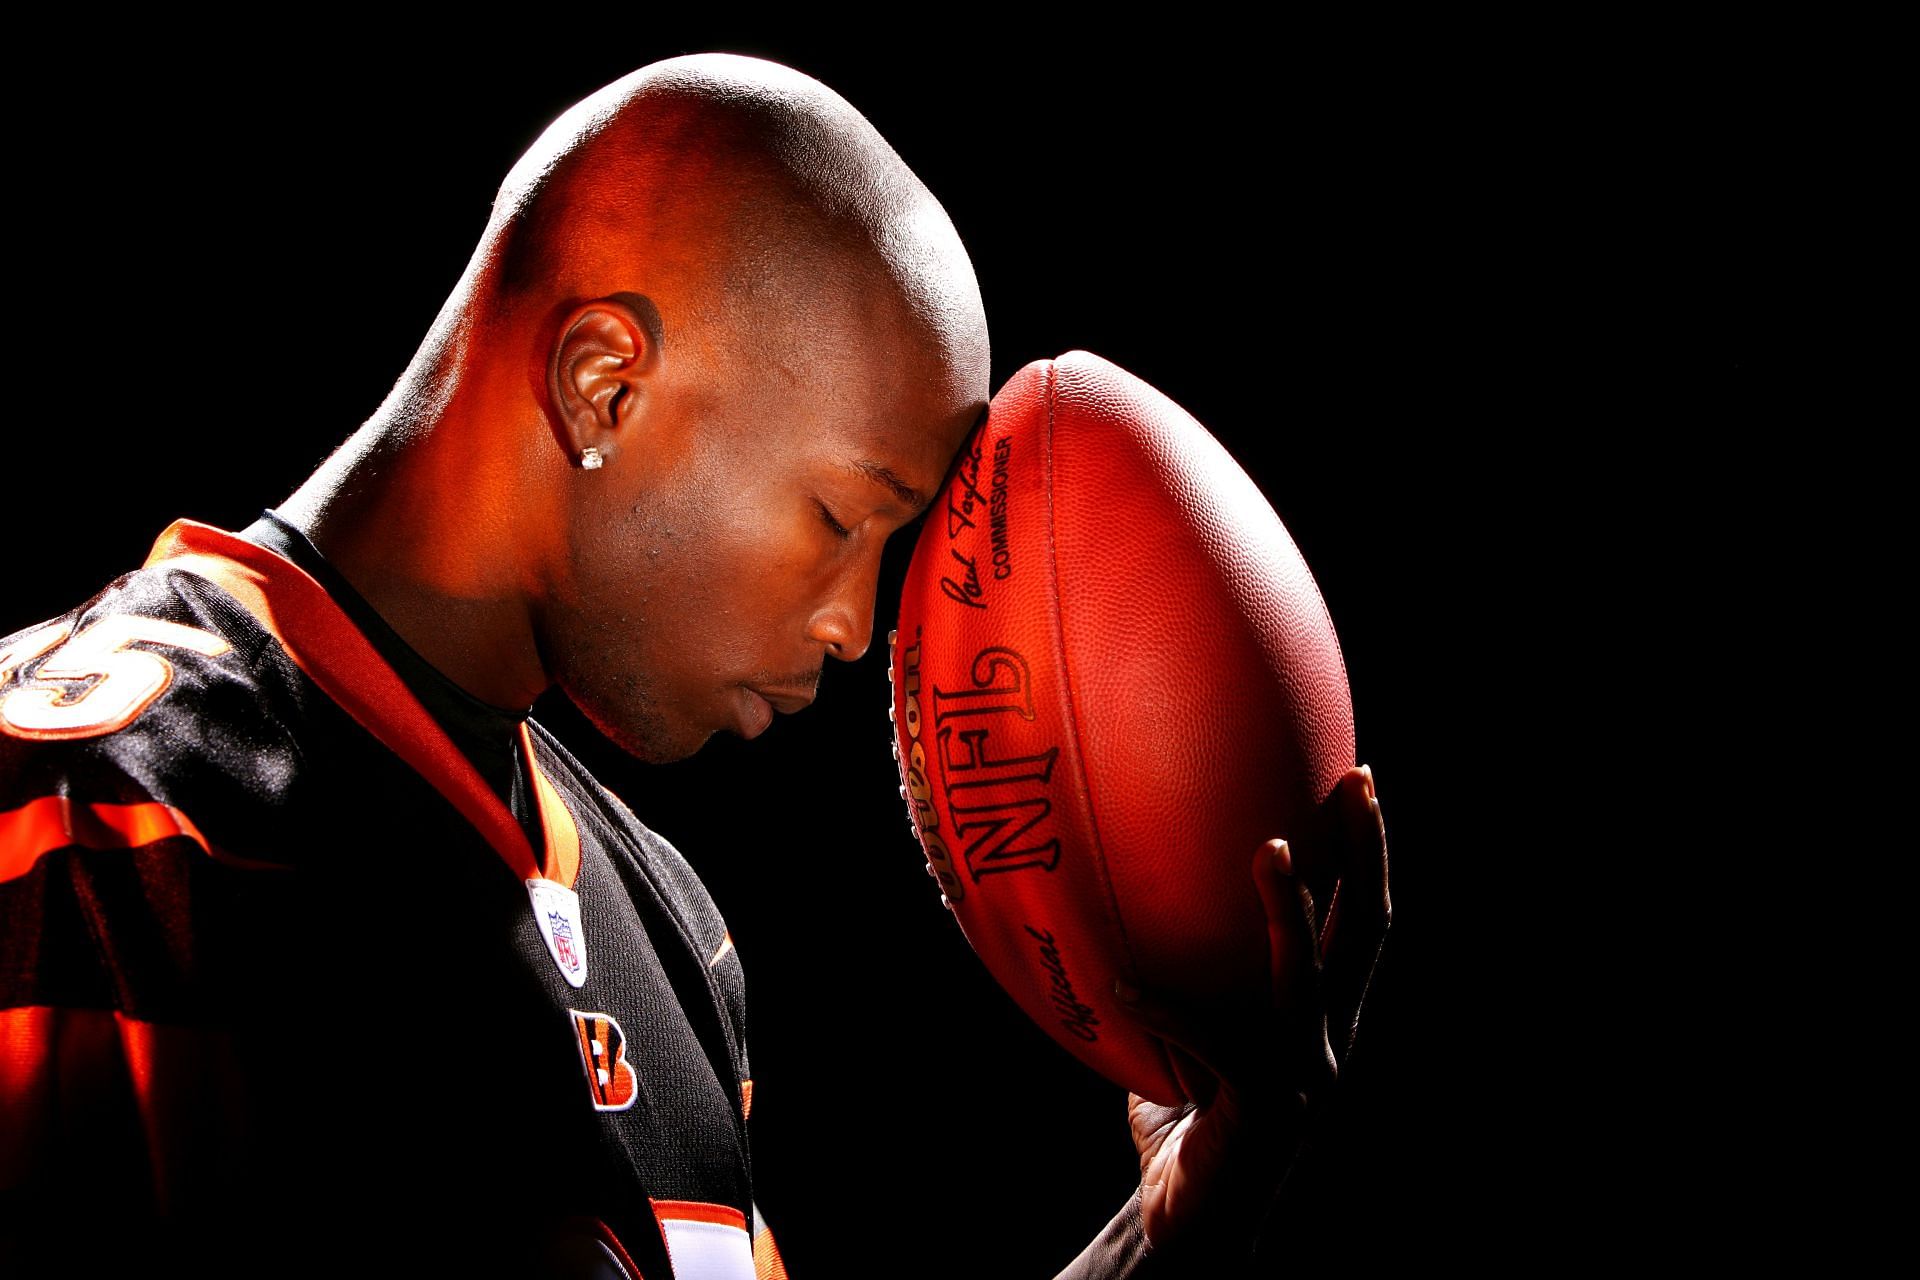 Former NFL wide receiver Chad Johnson